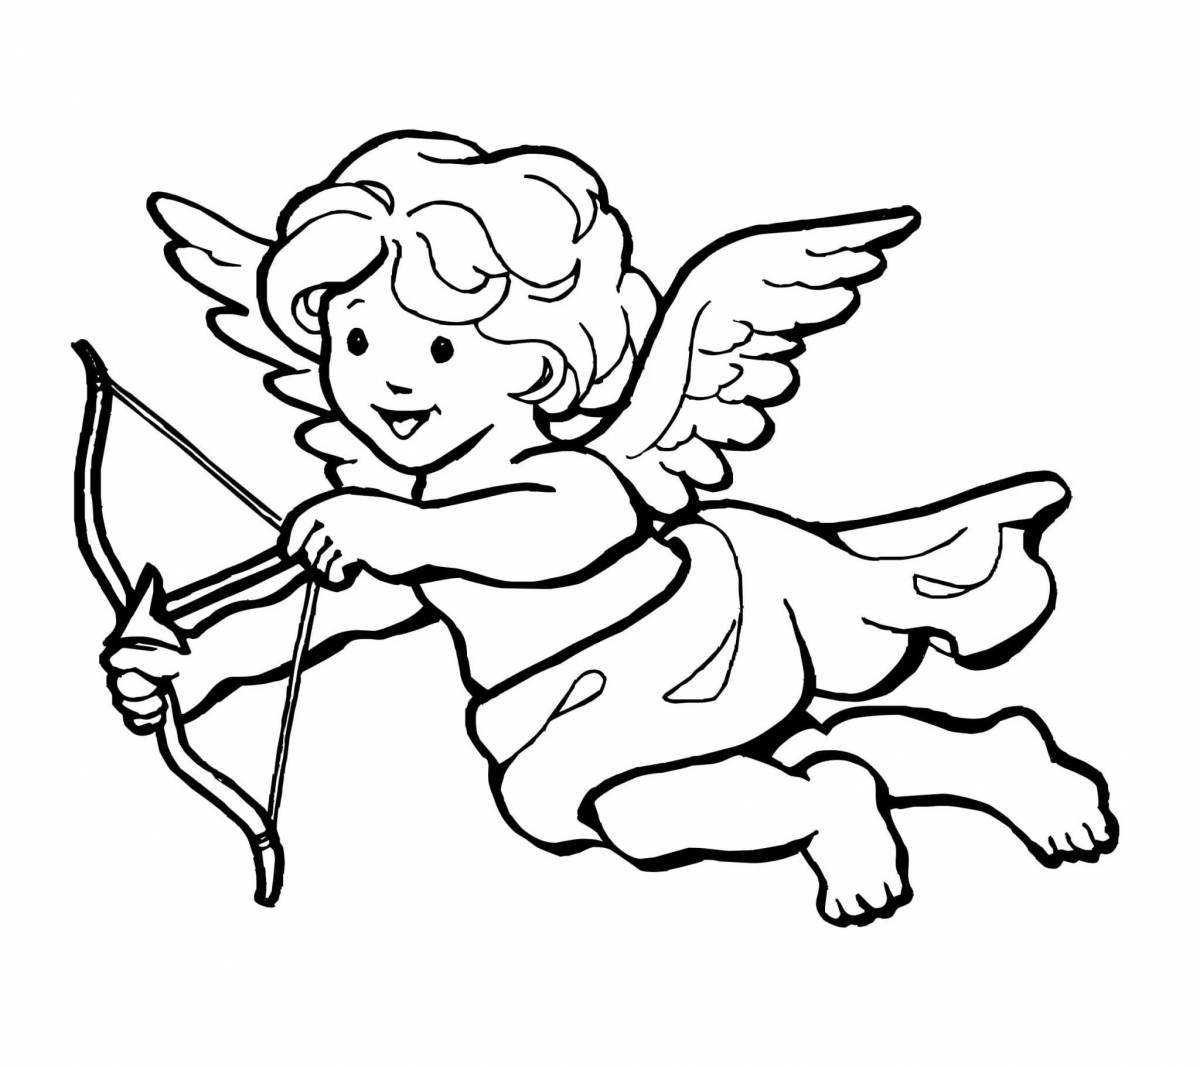 Coloring page charming cupid